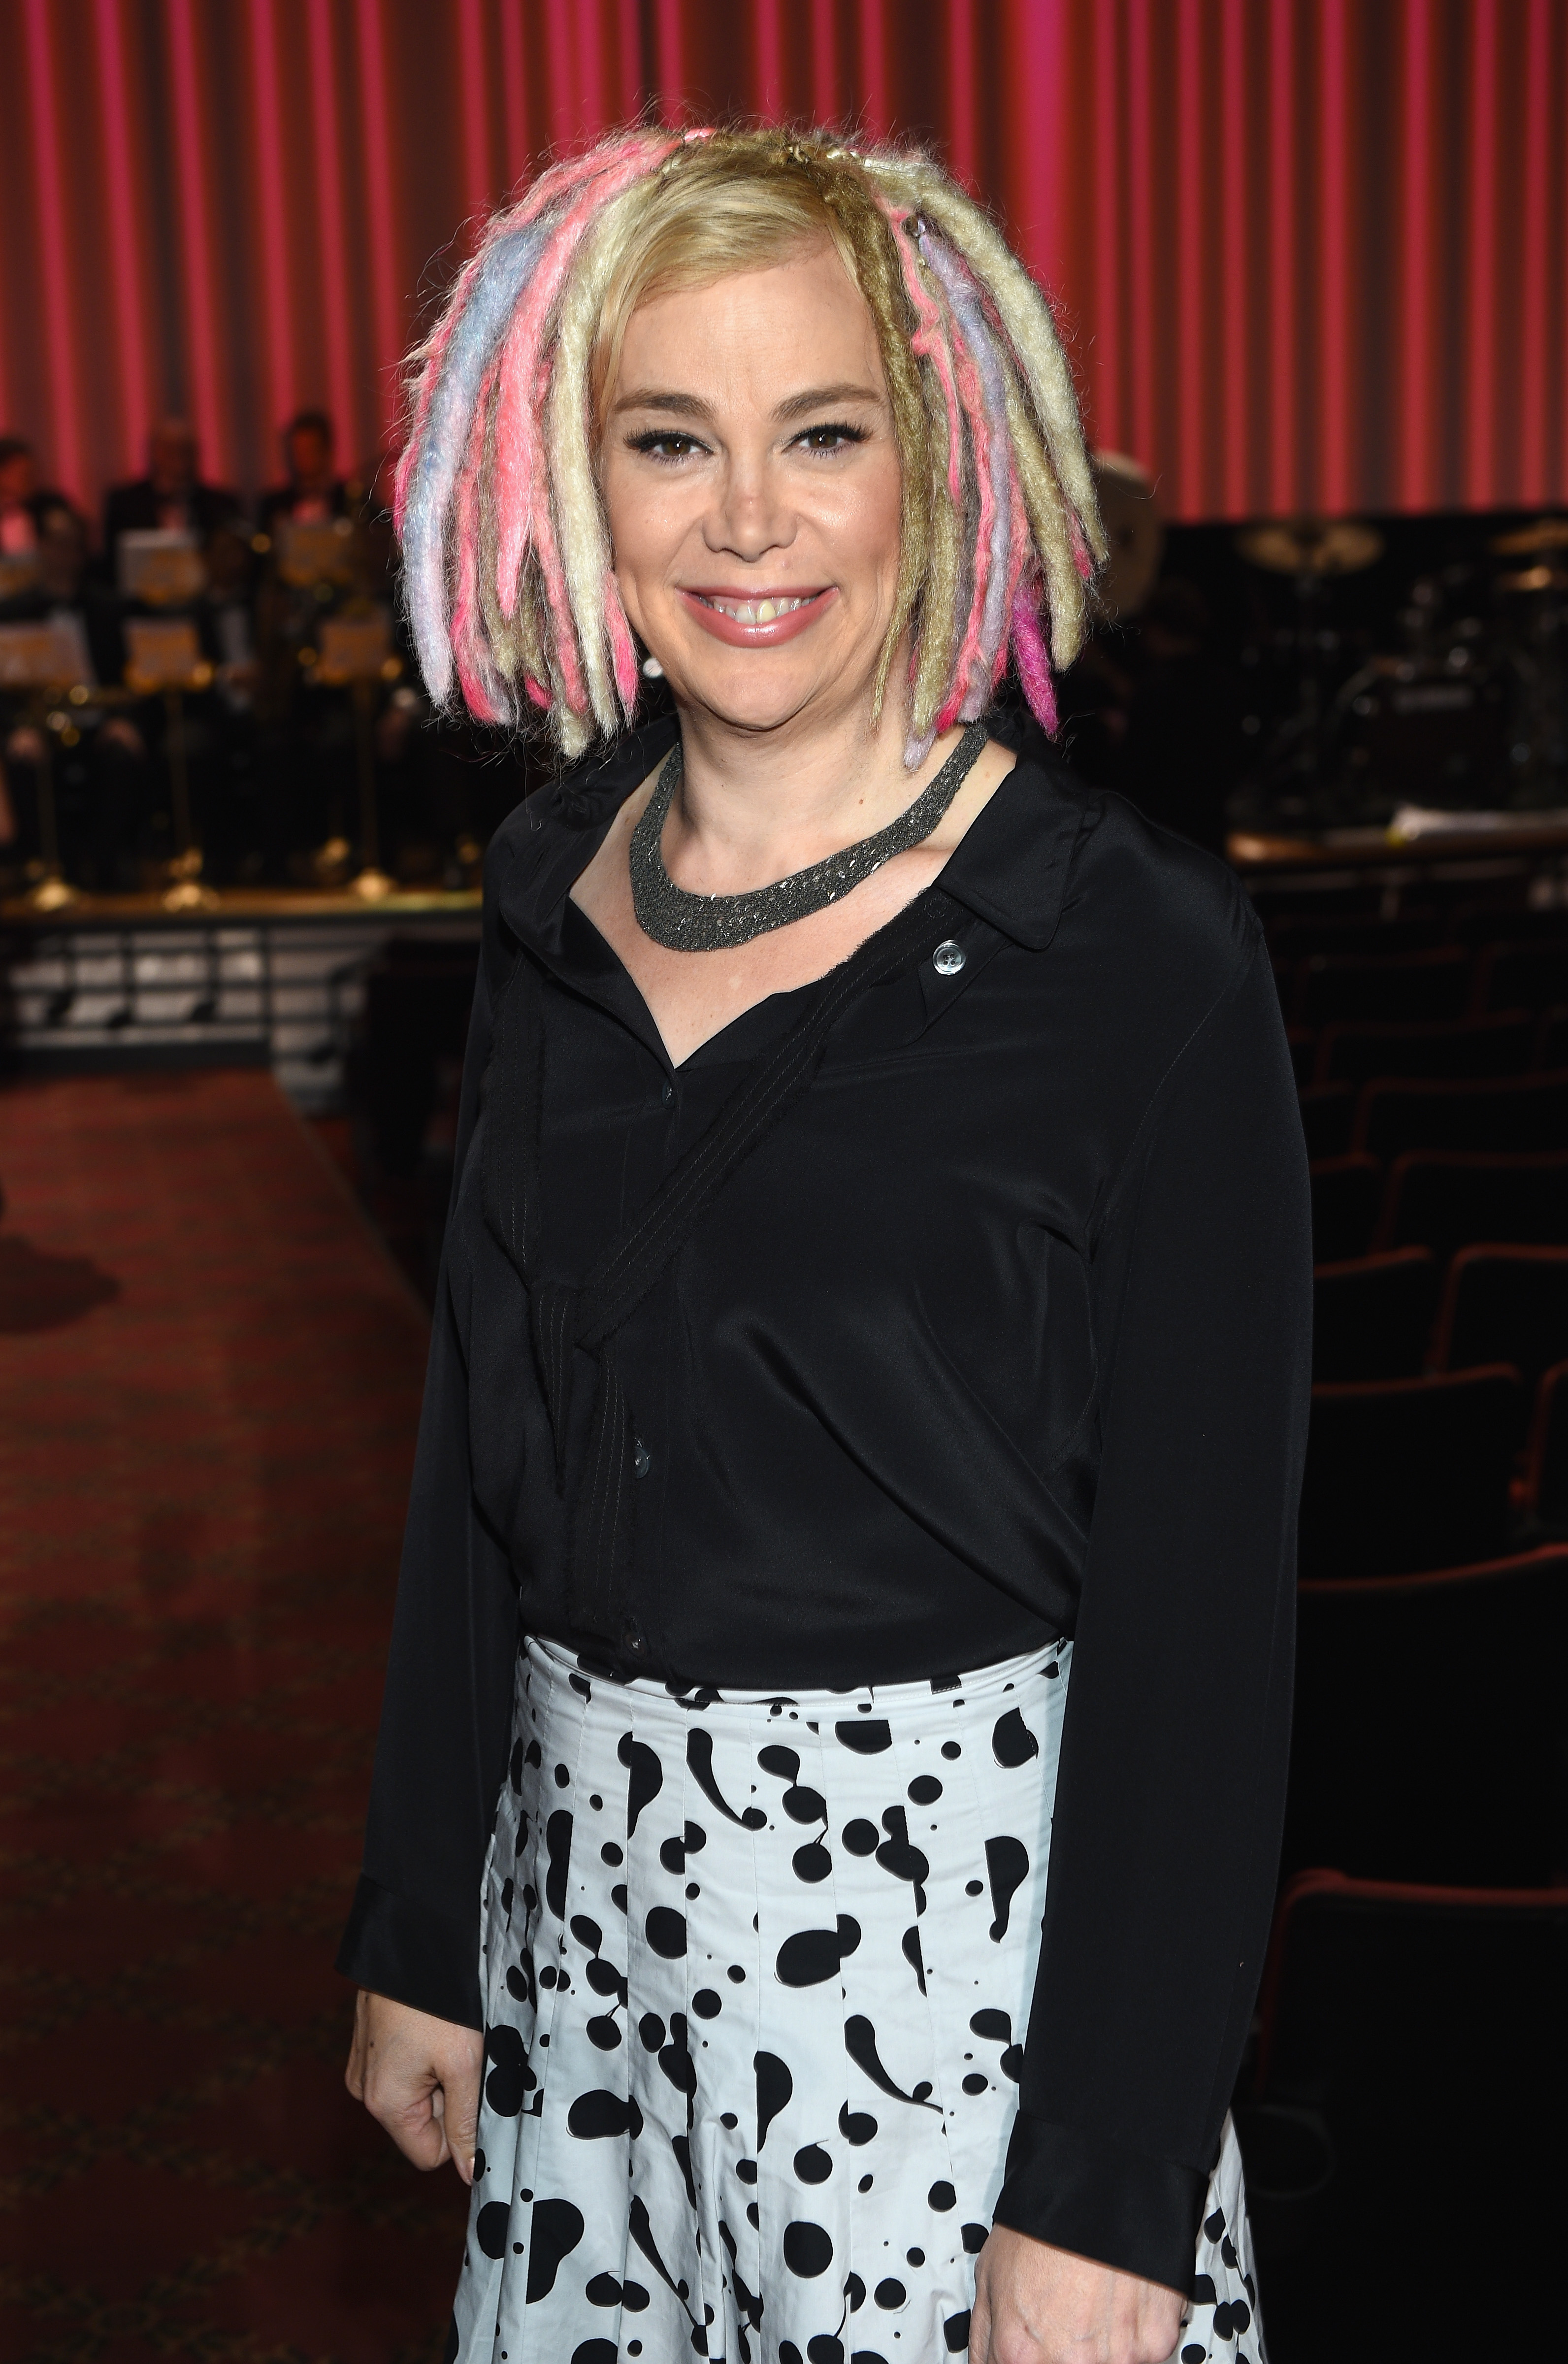 Lana Wachowski attends the Marc Jacobs Spring 2016 fashion show during New York Fashion Week on September 17, 2015 in New York City. | Source: Getty Images